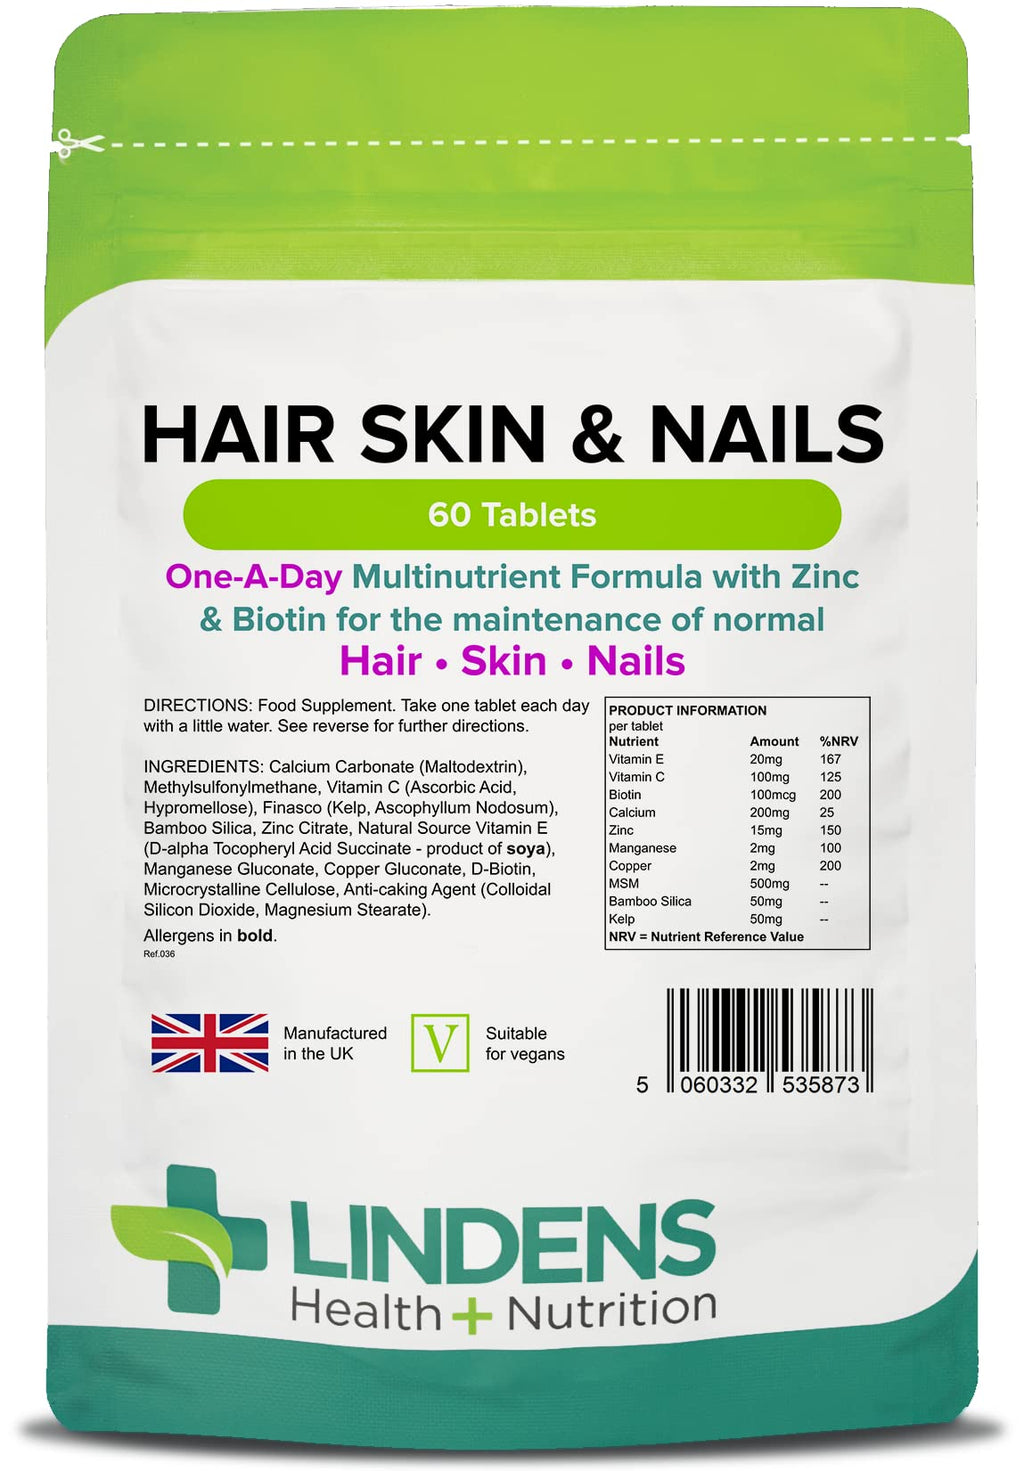 [Australia] - Lindens Hair Skin & Nails Tablets - 60 Pack - Contains Biotin, Zinc, Silica, Vitamin C, Vitamin E & MSM in A Convenient One-a-Day Tablet - UK Manufacturer, Letterbox Friendly 